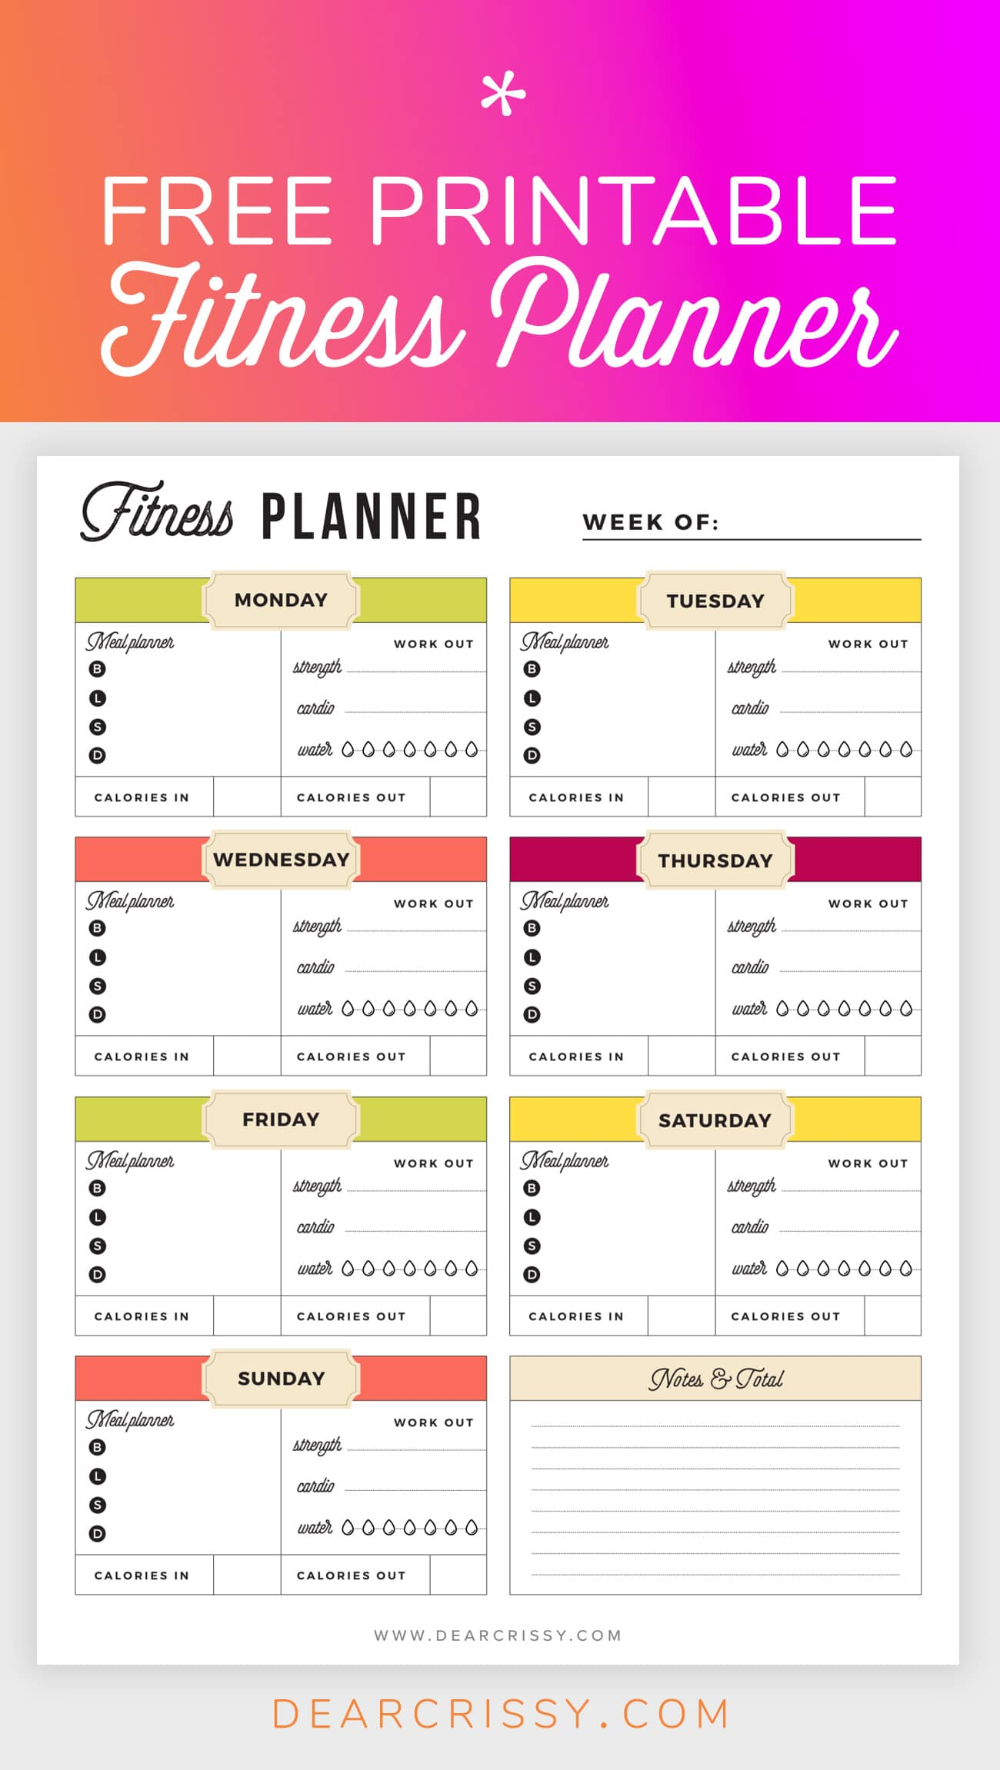 Free Printable Fitness Planner - Meal and Fitness Tracker, Start Today! -   16 fitness Planner diy ideas